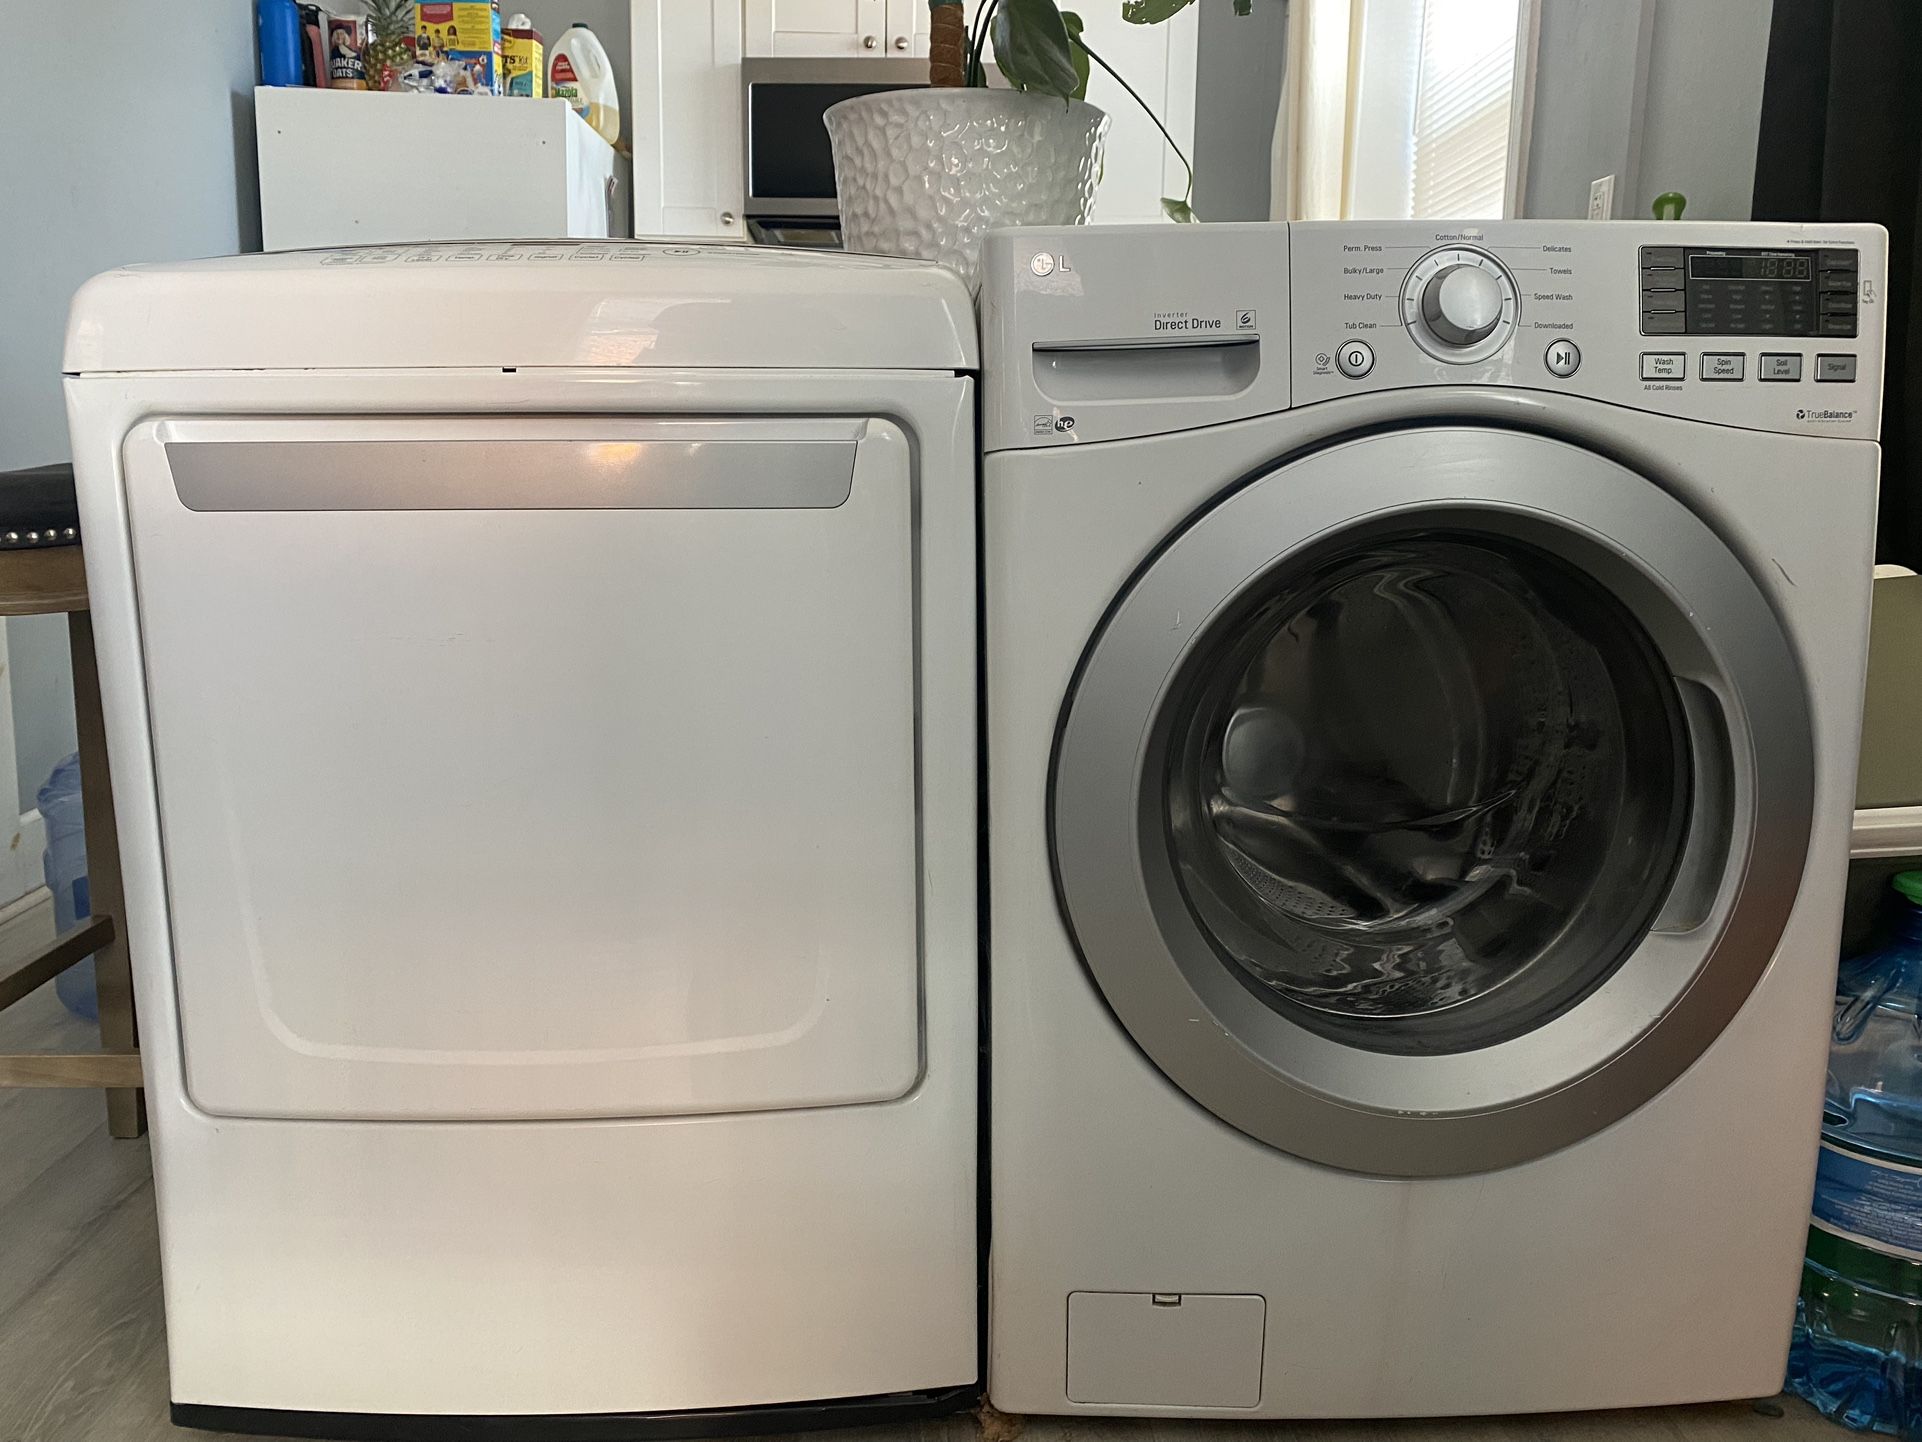 Lg Washer and dryer 